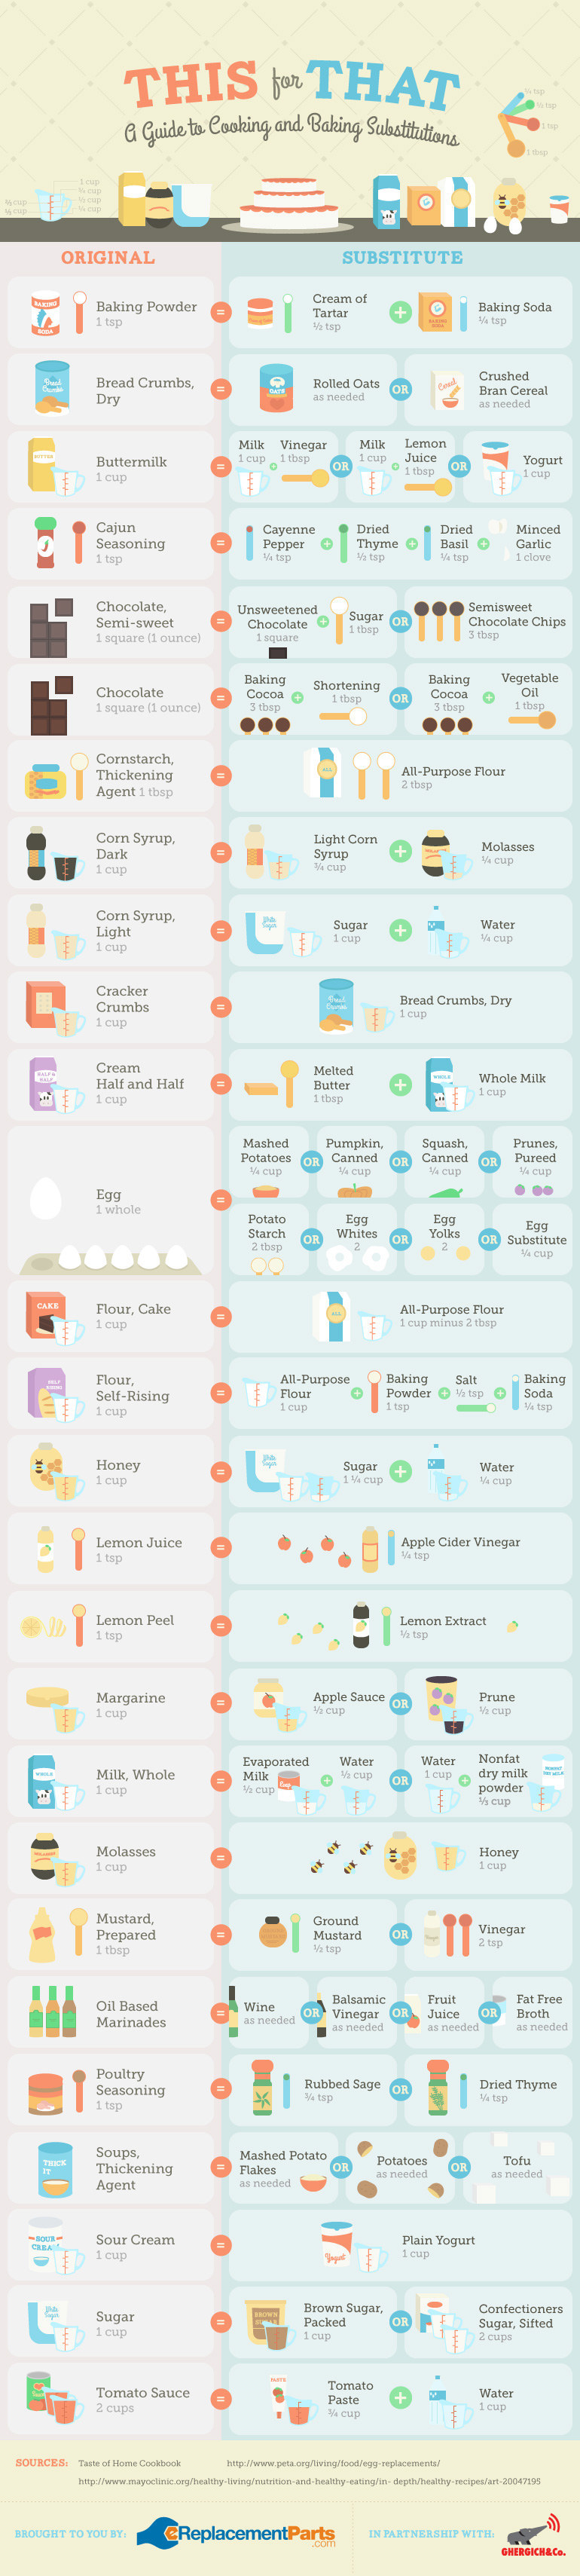 Ingredient Replacement Chart